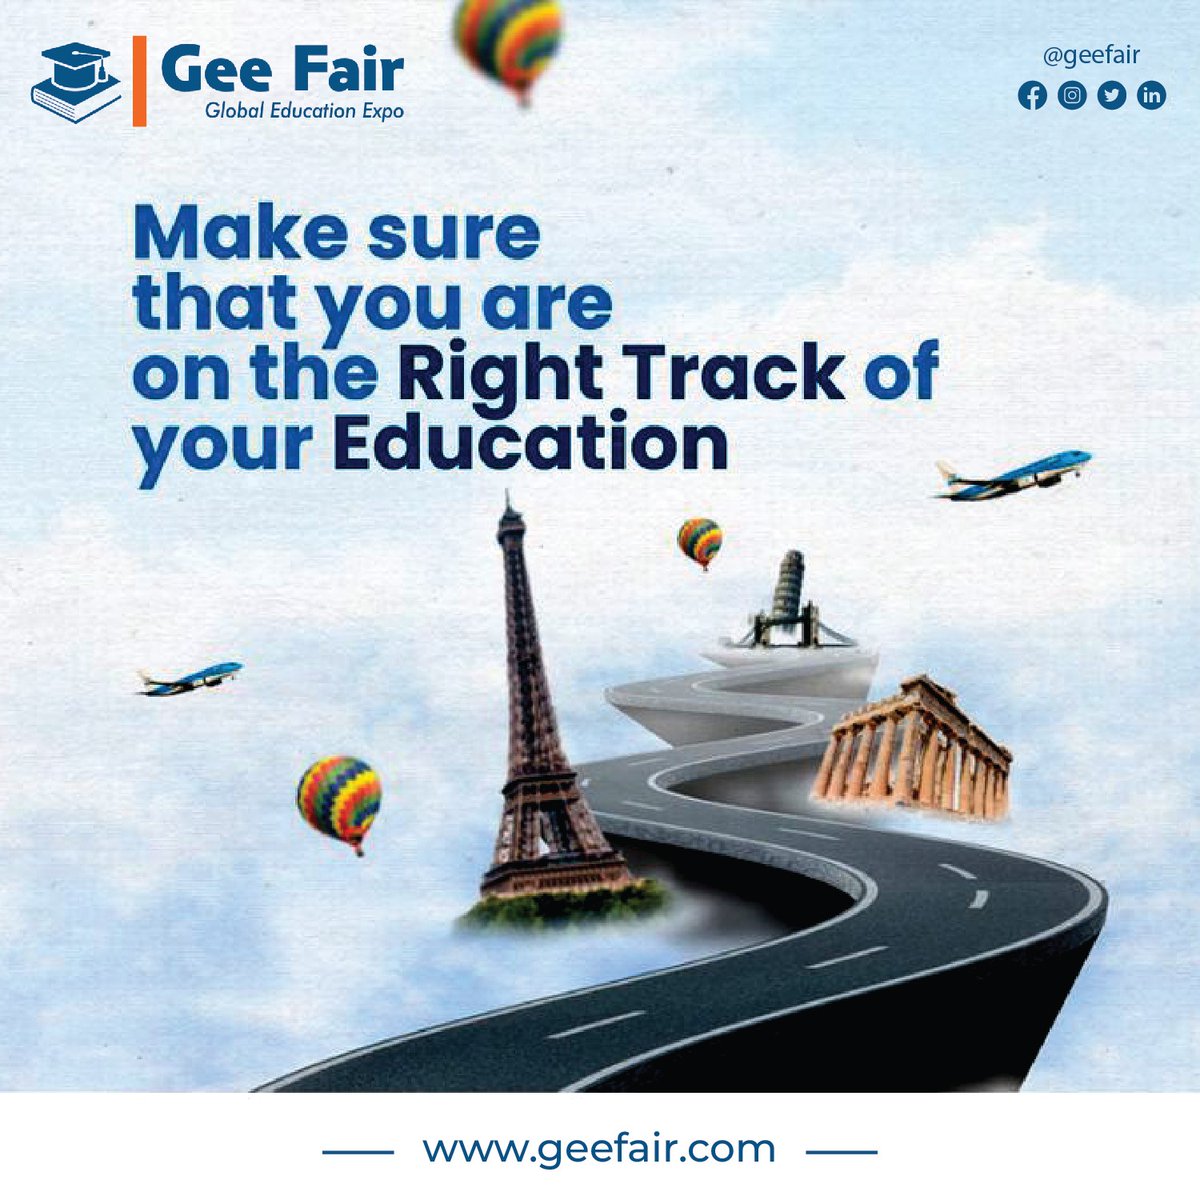 'Dive into a world of learning at Gee Fair Education Expo! 📚✨ Discover new things, get inspired, and have fun with us! It's where curiosity meets excitement. 
#geefair #learningadventure #exploreDreamThrive #discoverYourFuture #funlearning #geefairmagic #yourjourneystartshere